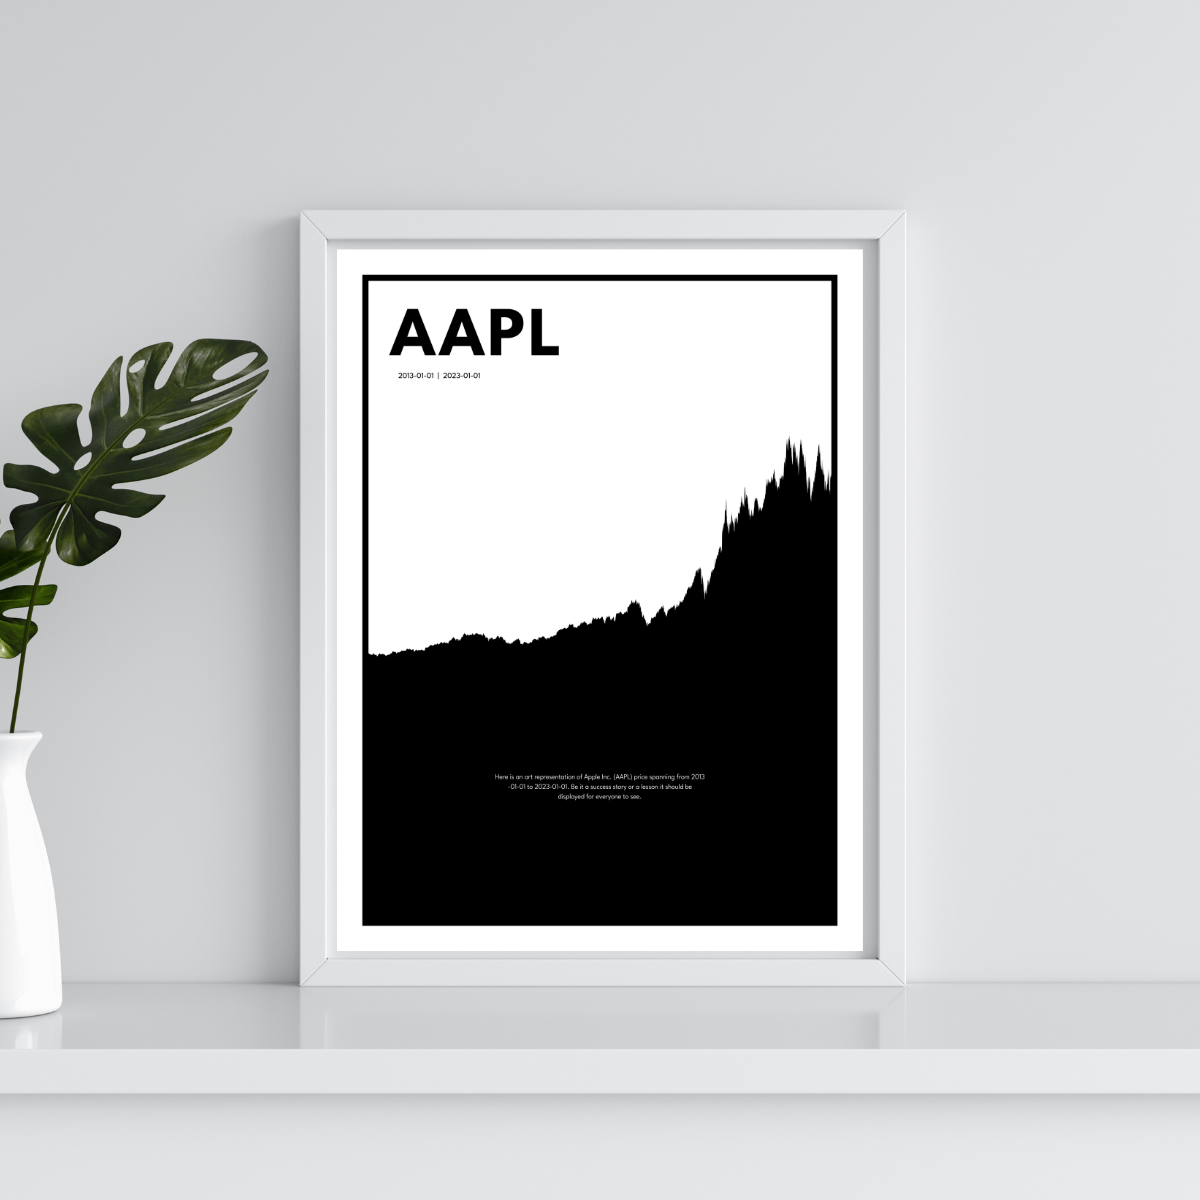 Apple Inc. (AAPL) trading poster hanging on a wall